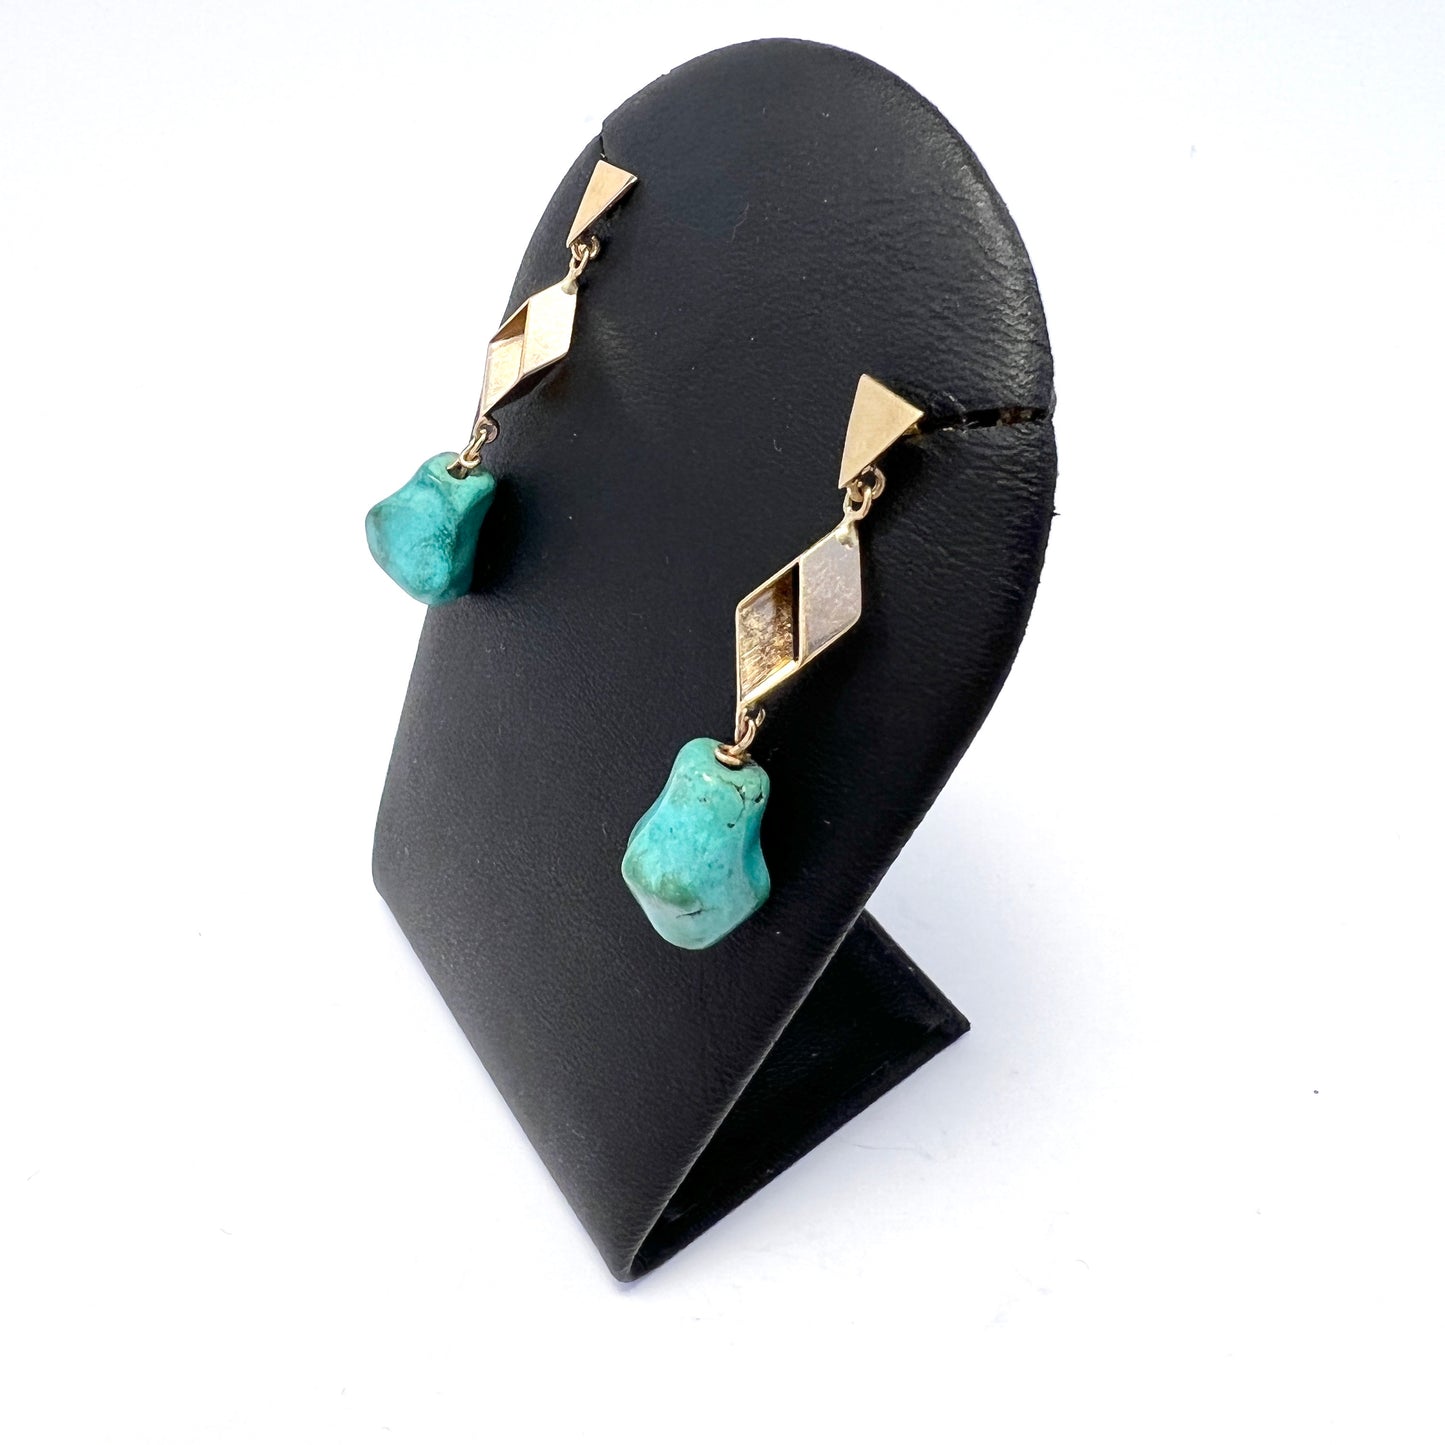 Vintage 18K Gold Turquoise Nugget Dangle Earrings.